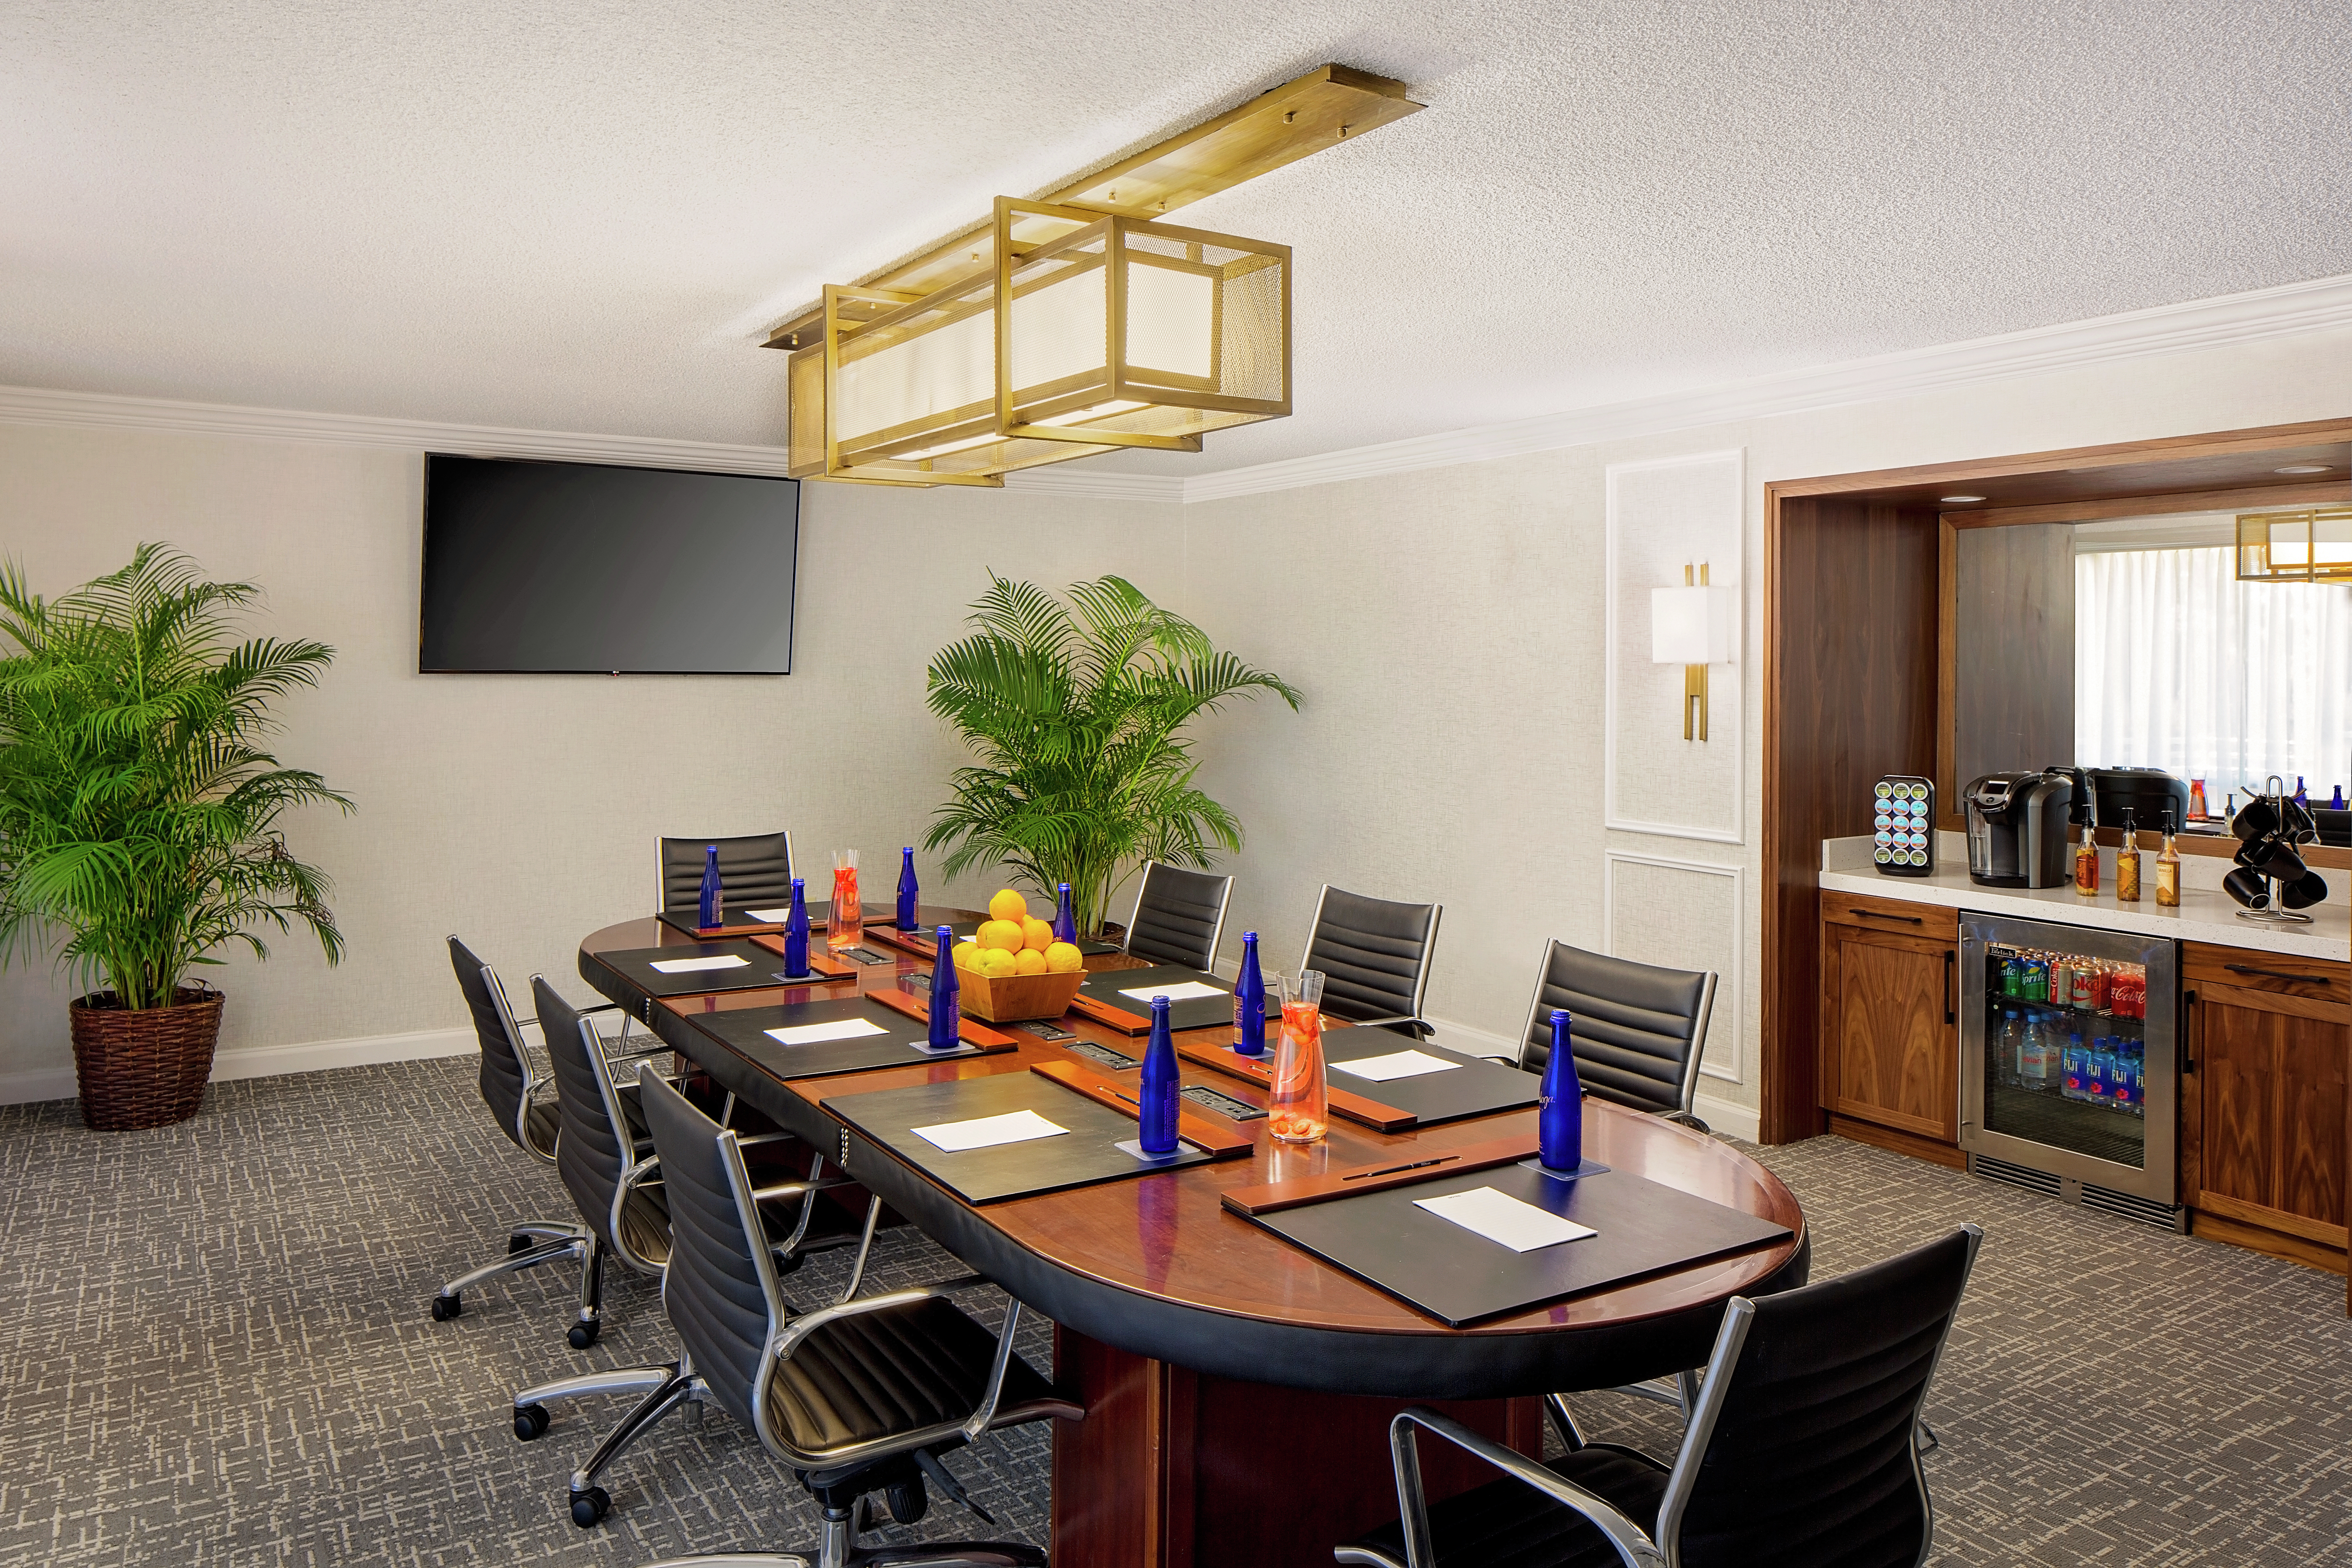 Meeting Room with Table, Office Chairs, Wall Mounted HDTV and Beverage Station